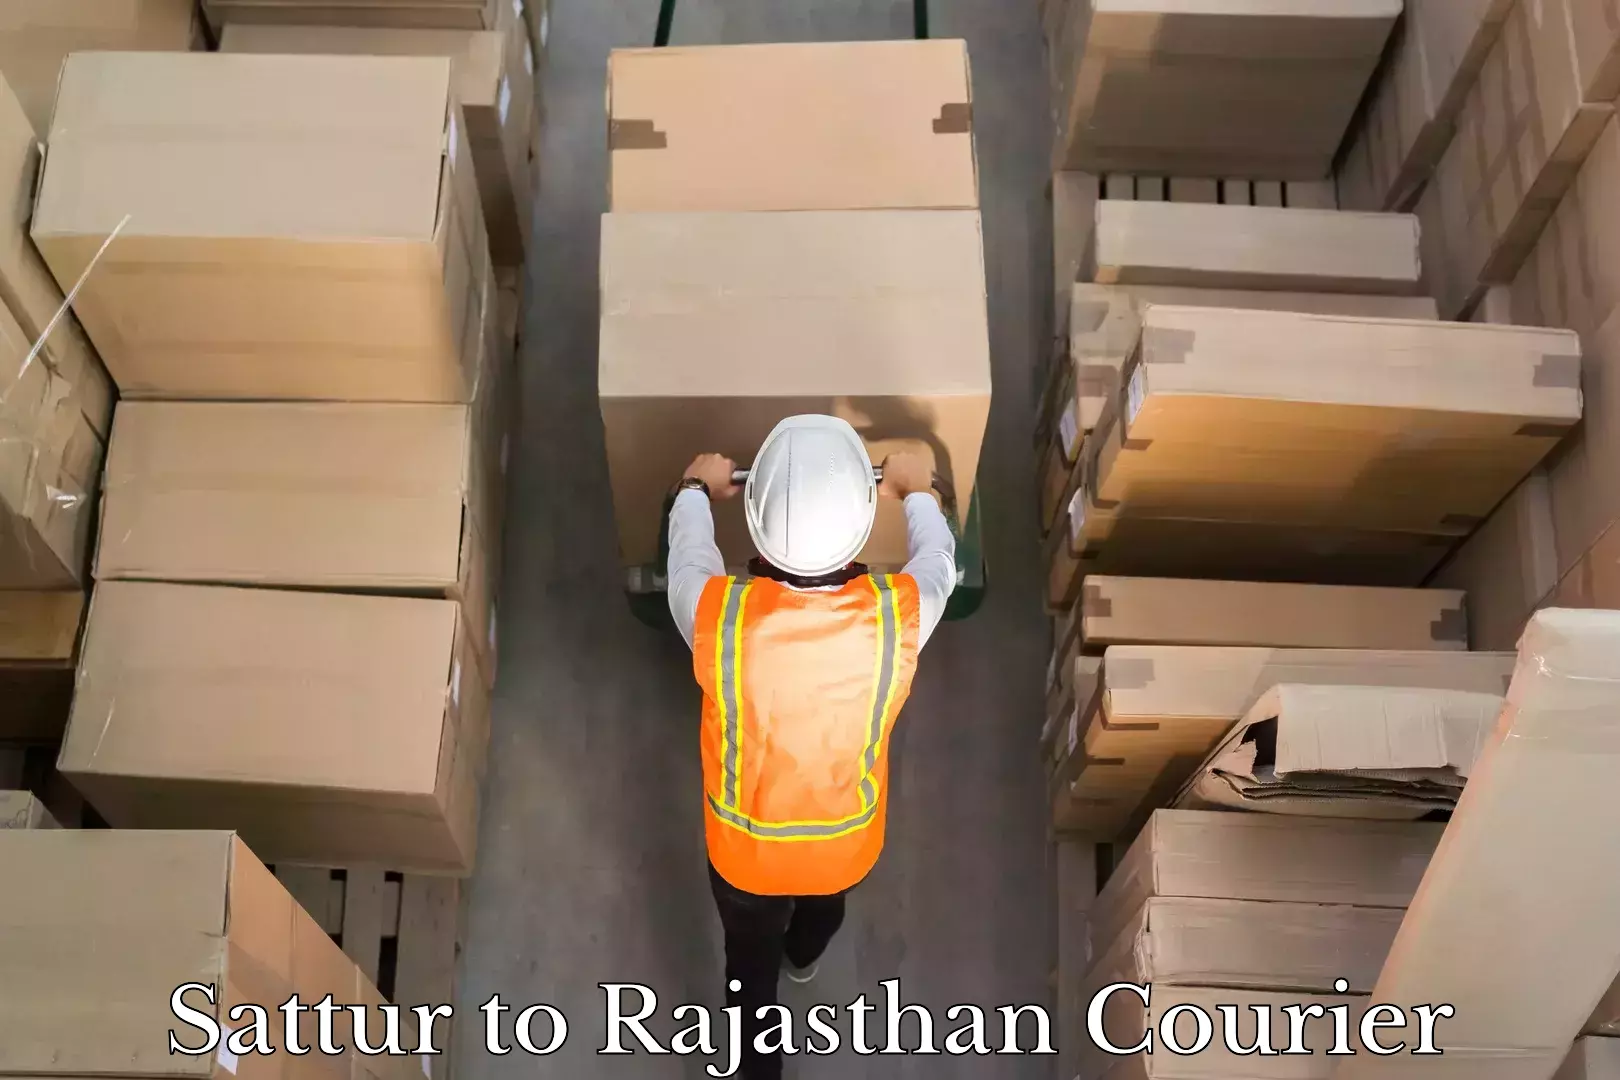 Personalized courier solutions Sattur to Rajasthan